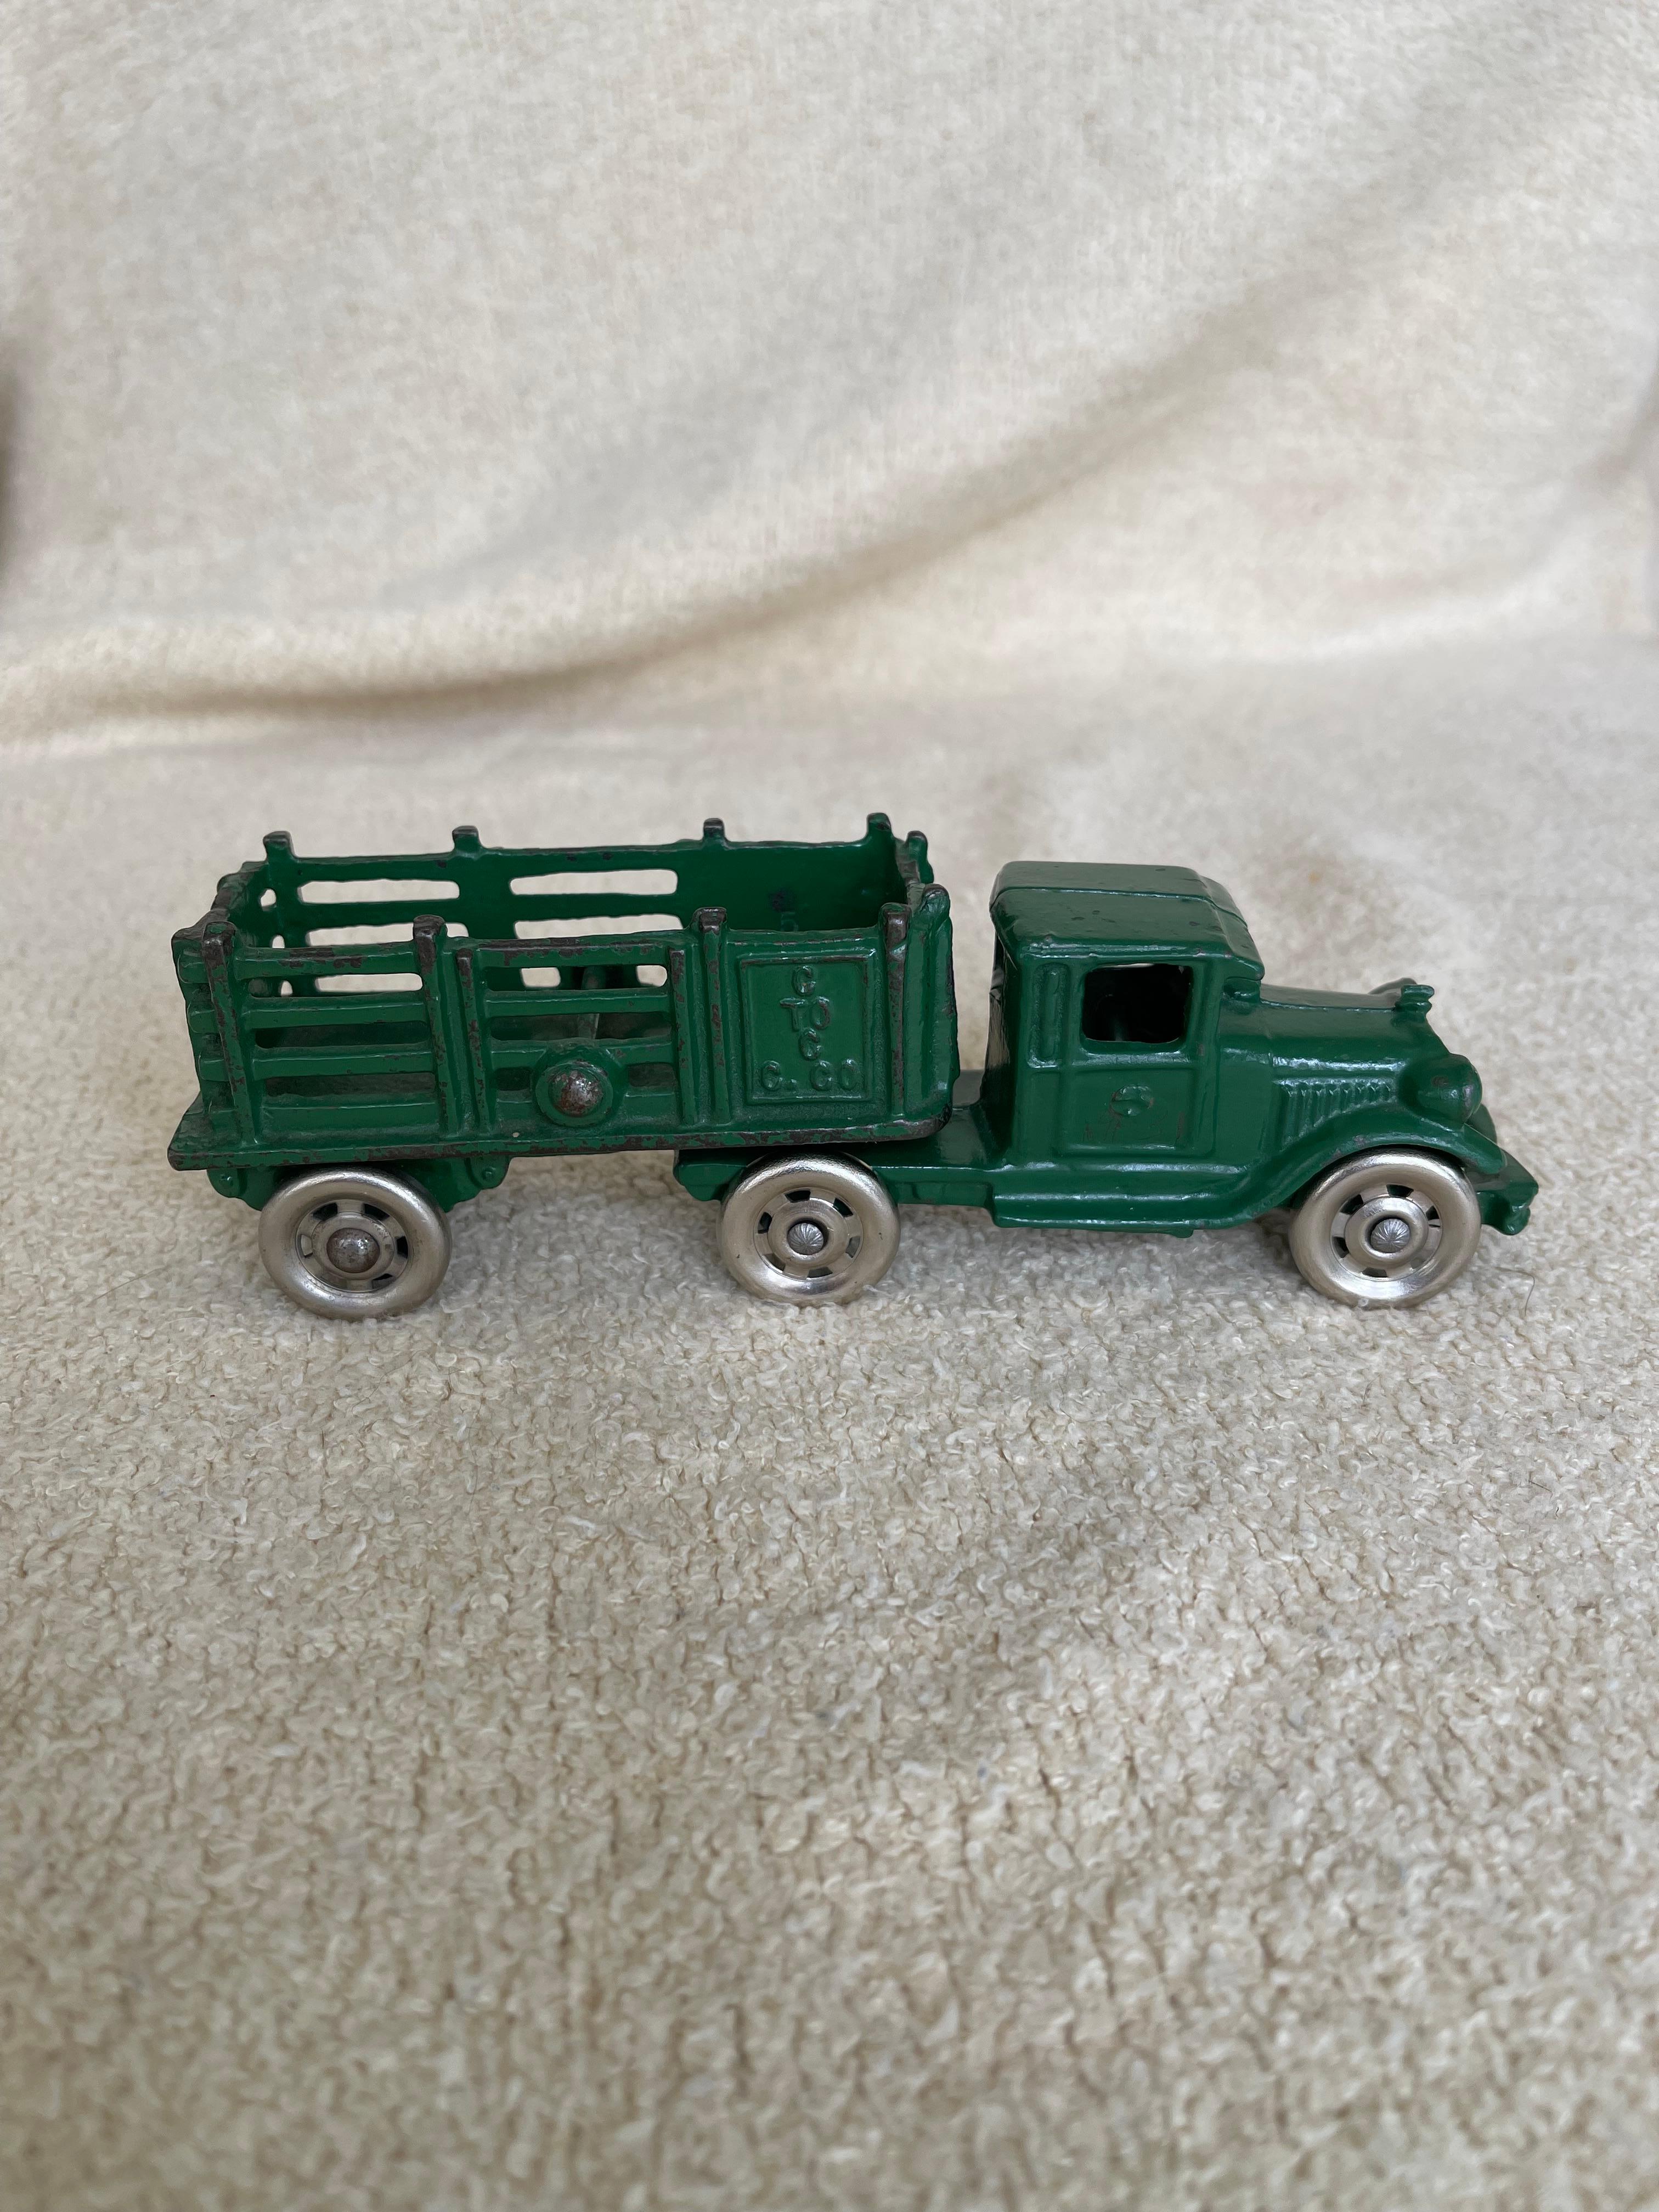  This beautiful truck is a fine example of the wonderful cast iron toys that were made in the U.S. in the first half of the 20th century. Having original dark green paint and iron wheels, and in condition that is so hard to find. No touch ups,